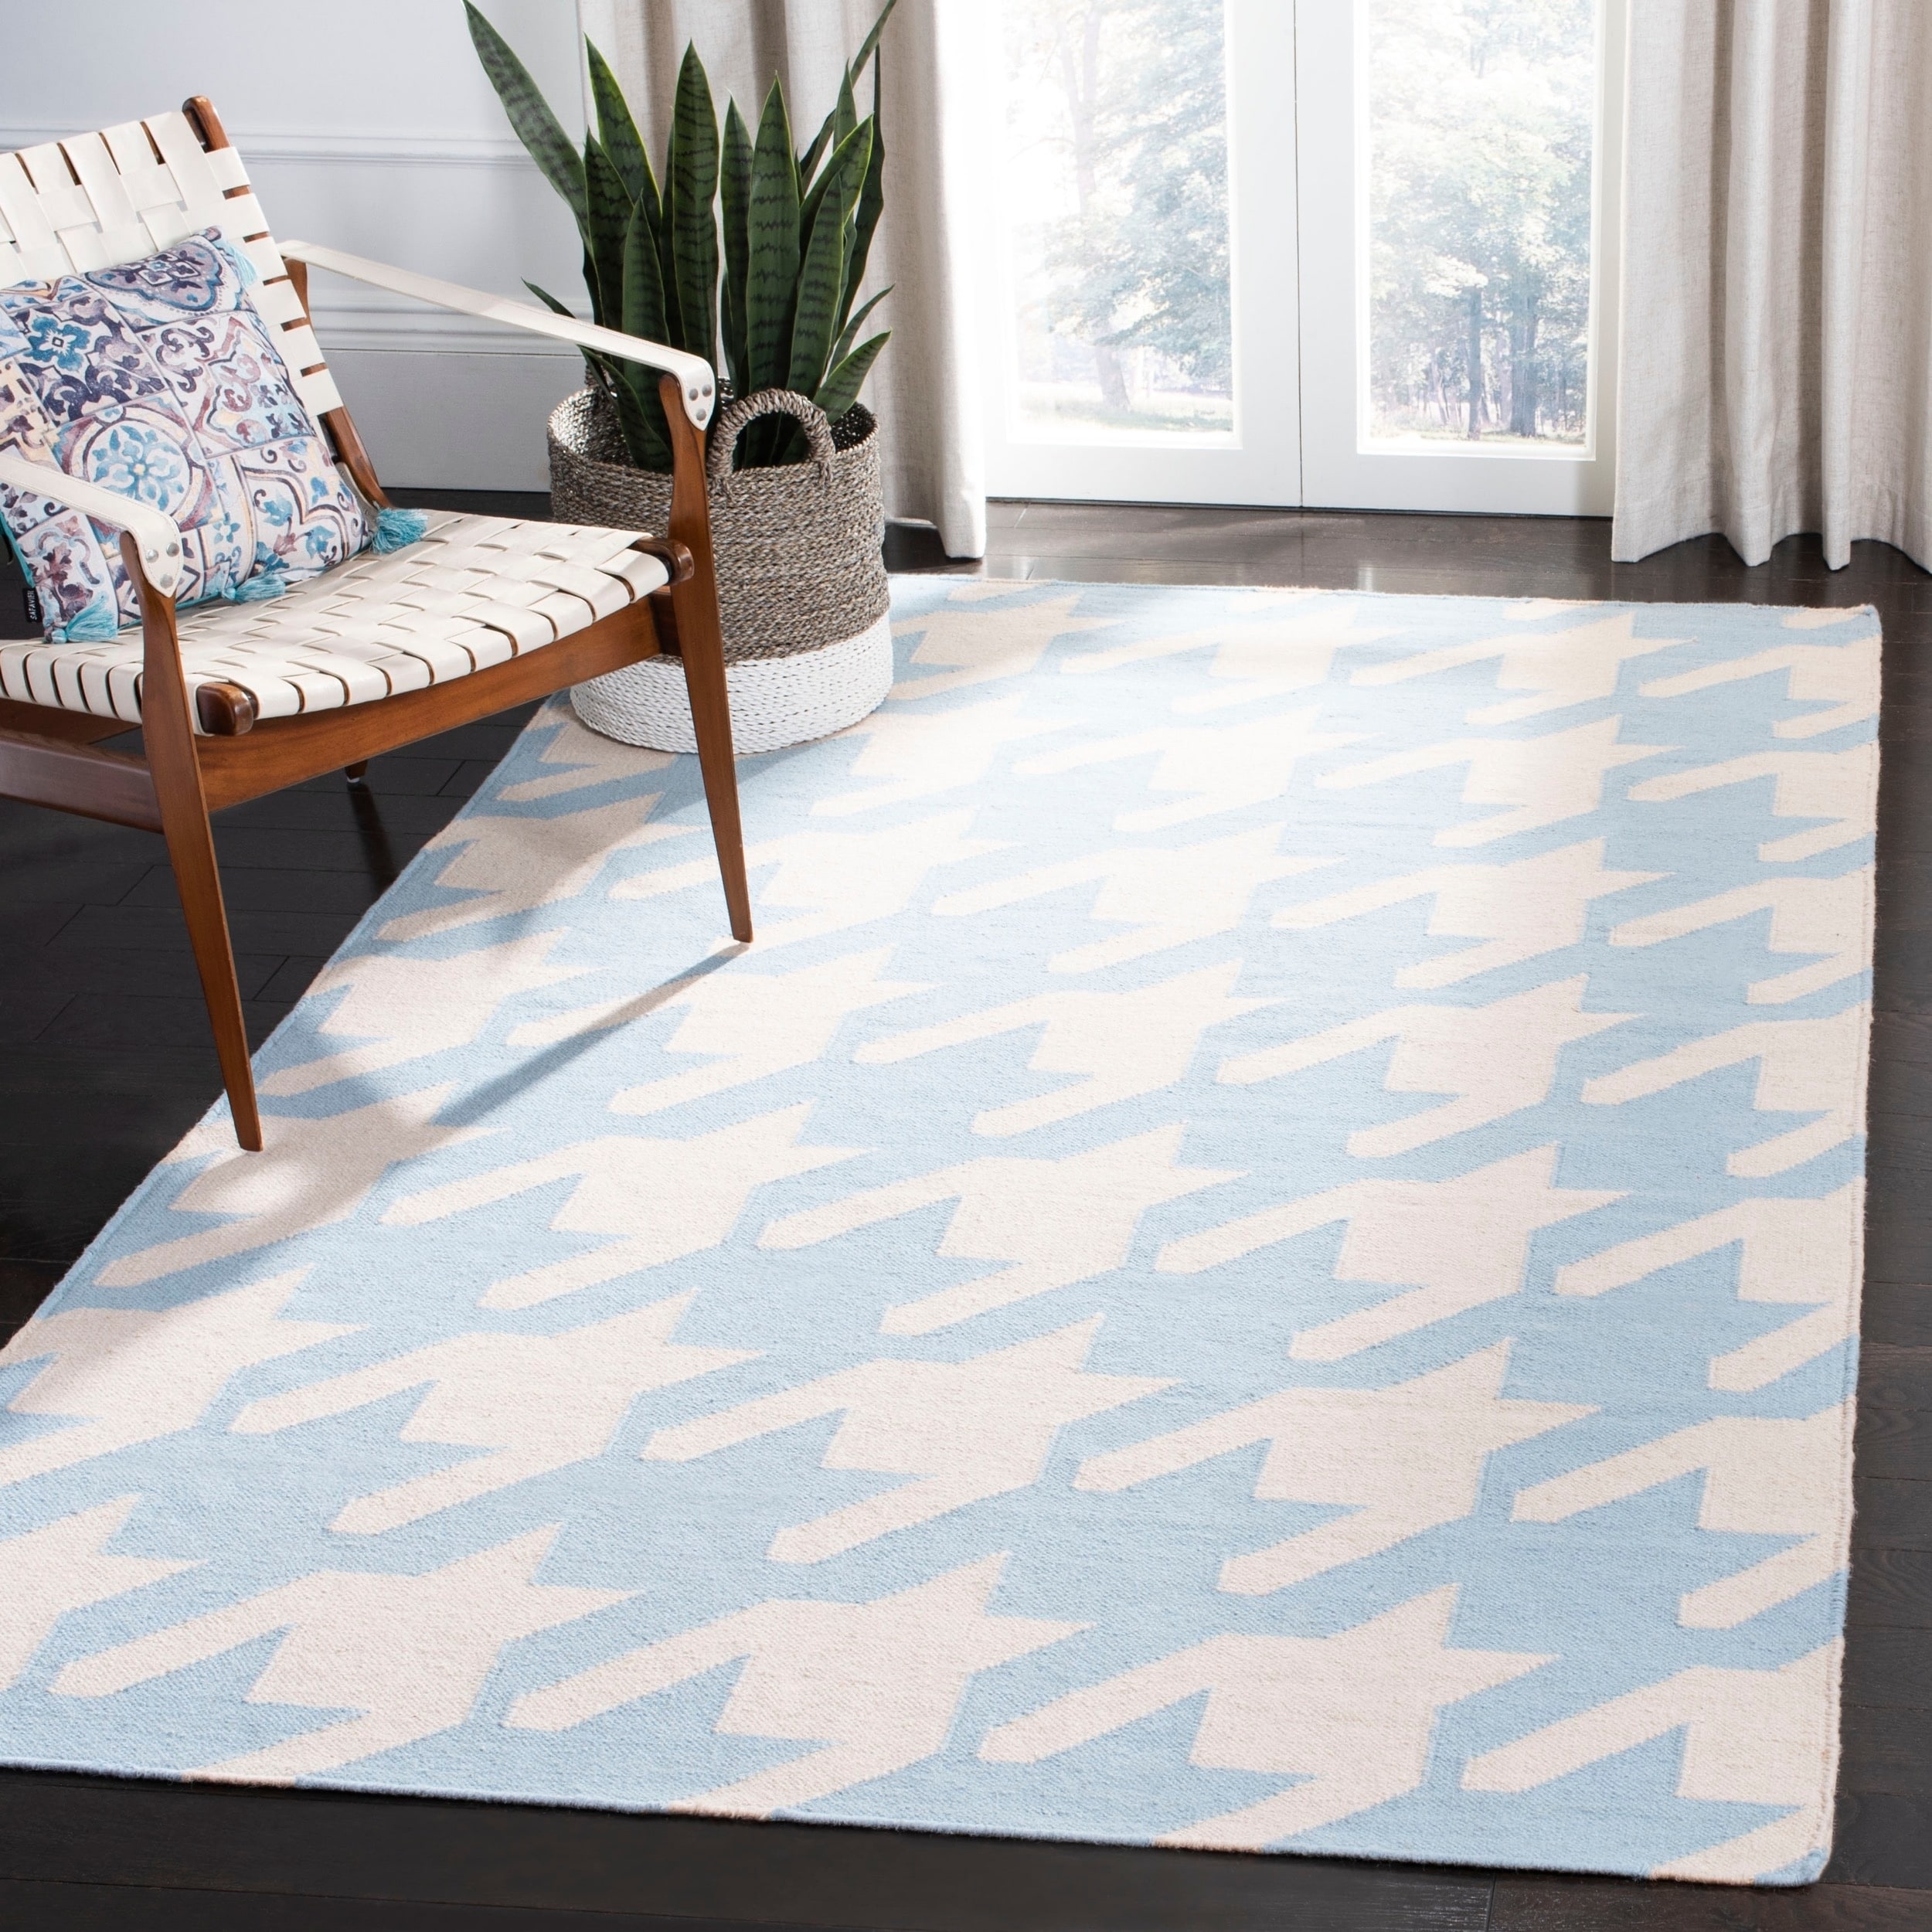 Safavieh Hand woven Moroccan Dhurries Light Blue/ Ivory Wool Rug (6 Square)